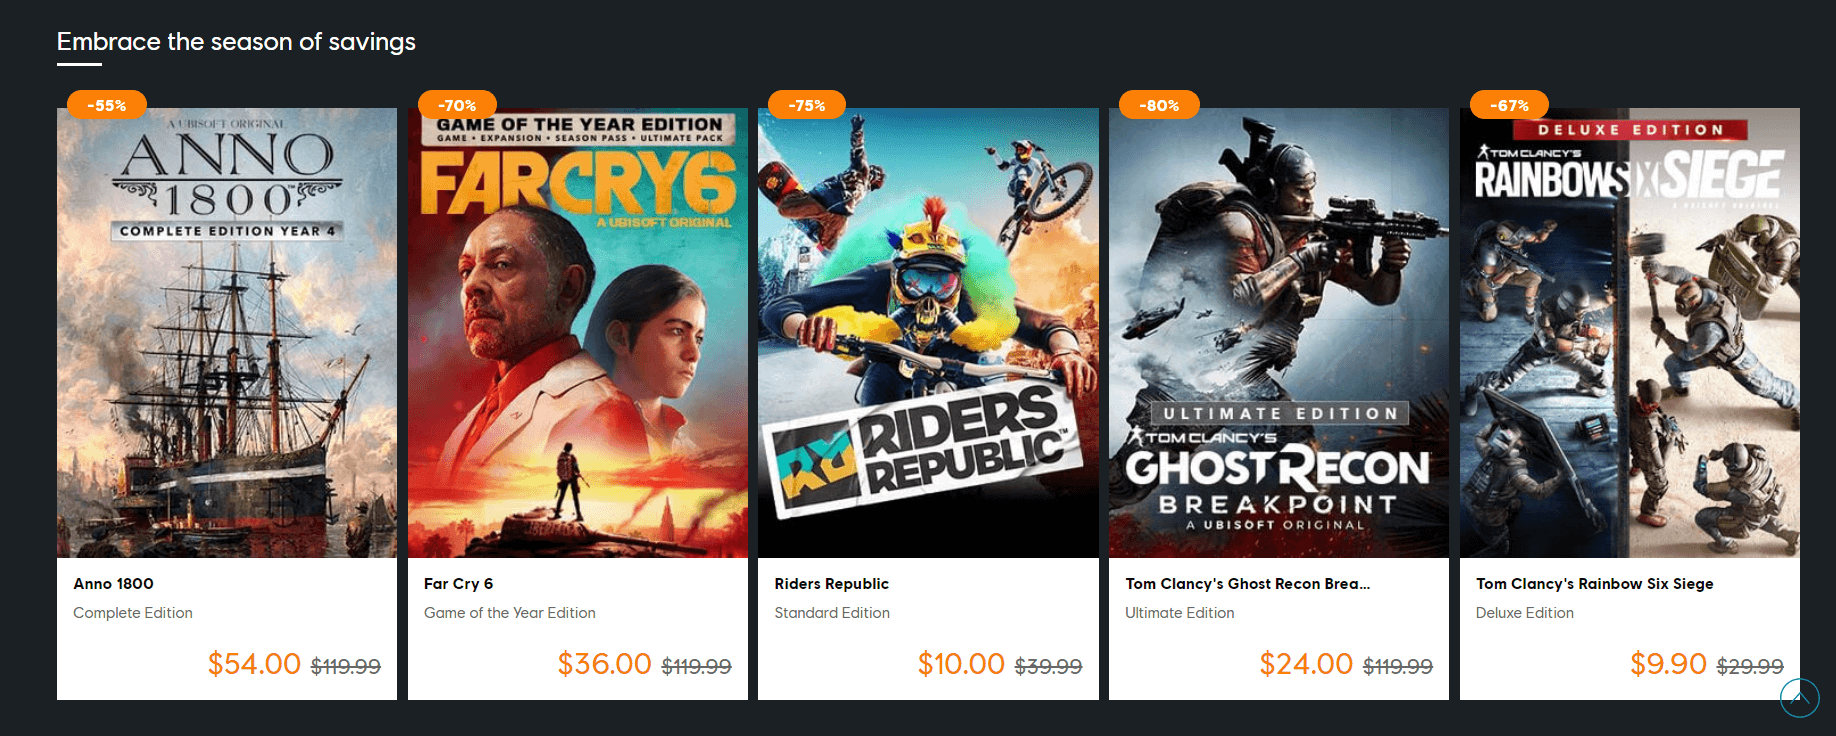 Some of the Major Highlights of Ubisoft's Autumn Sale